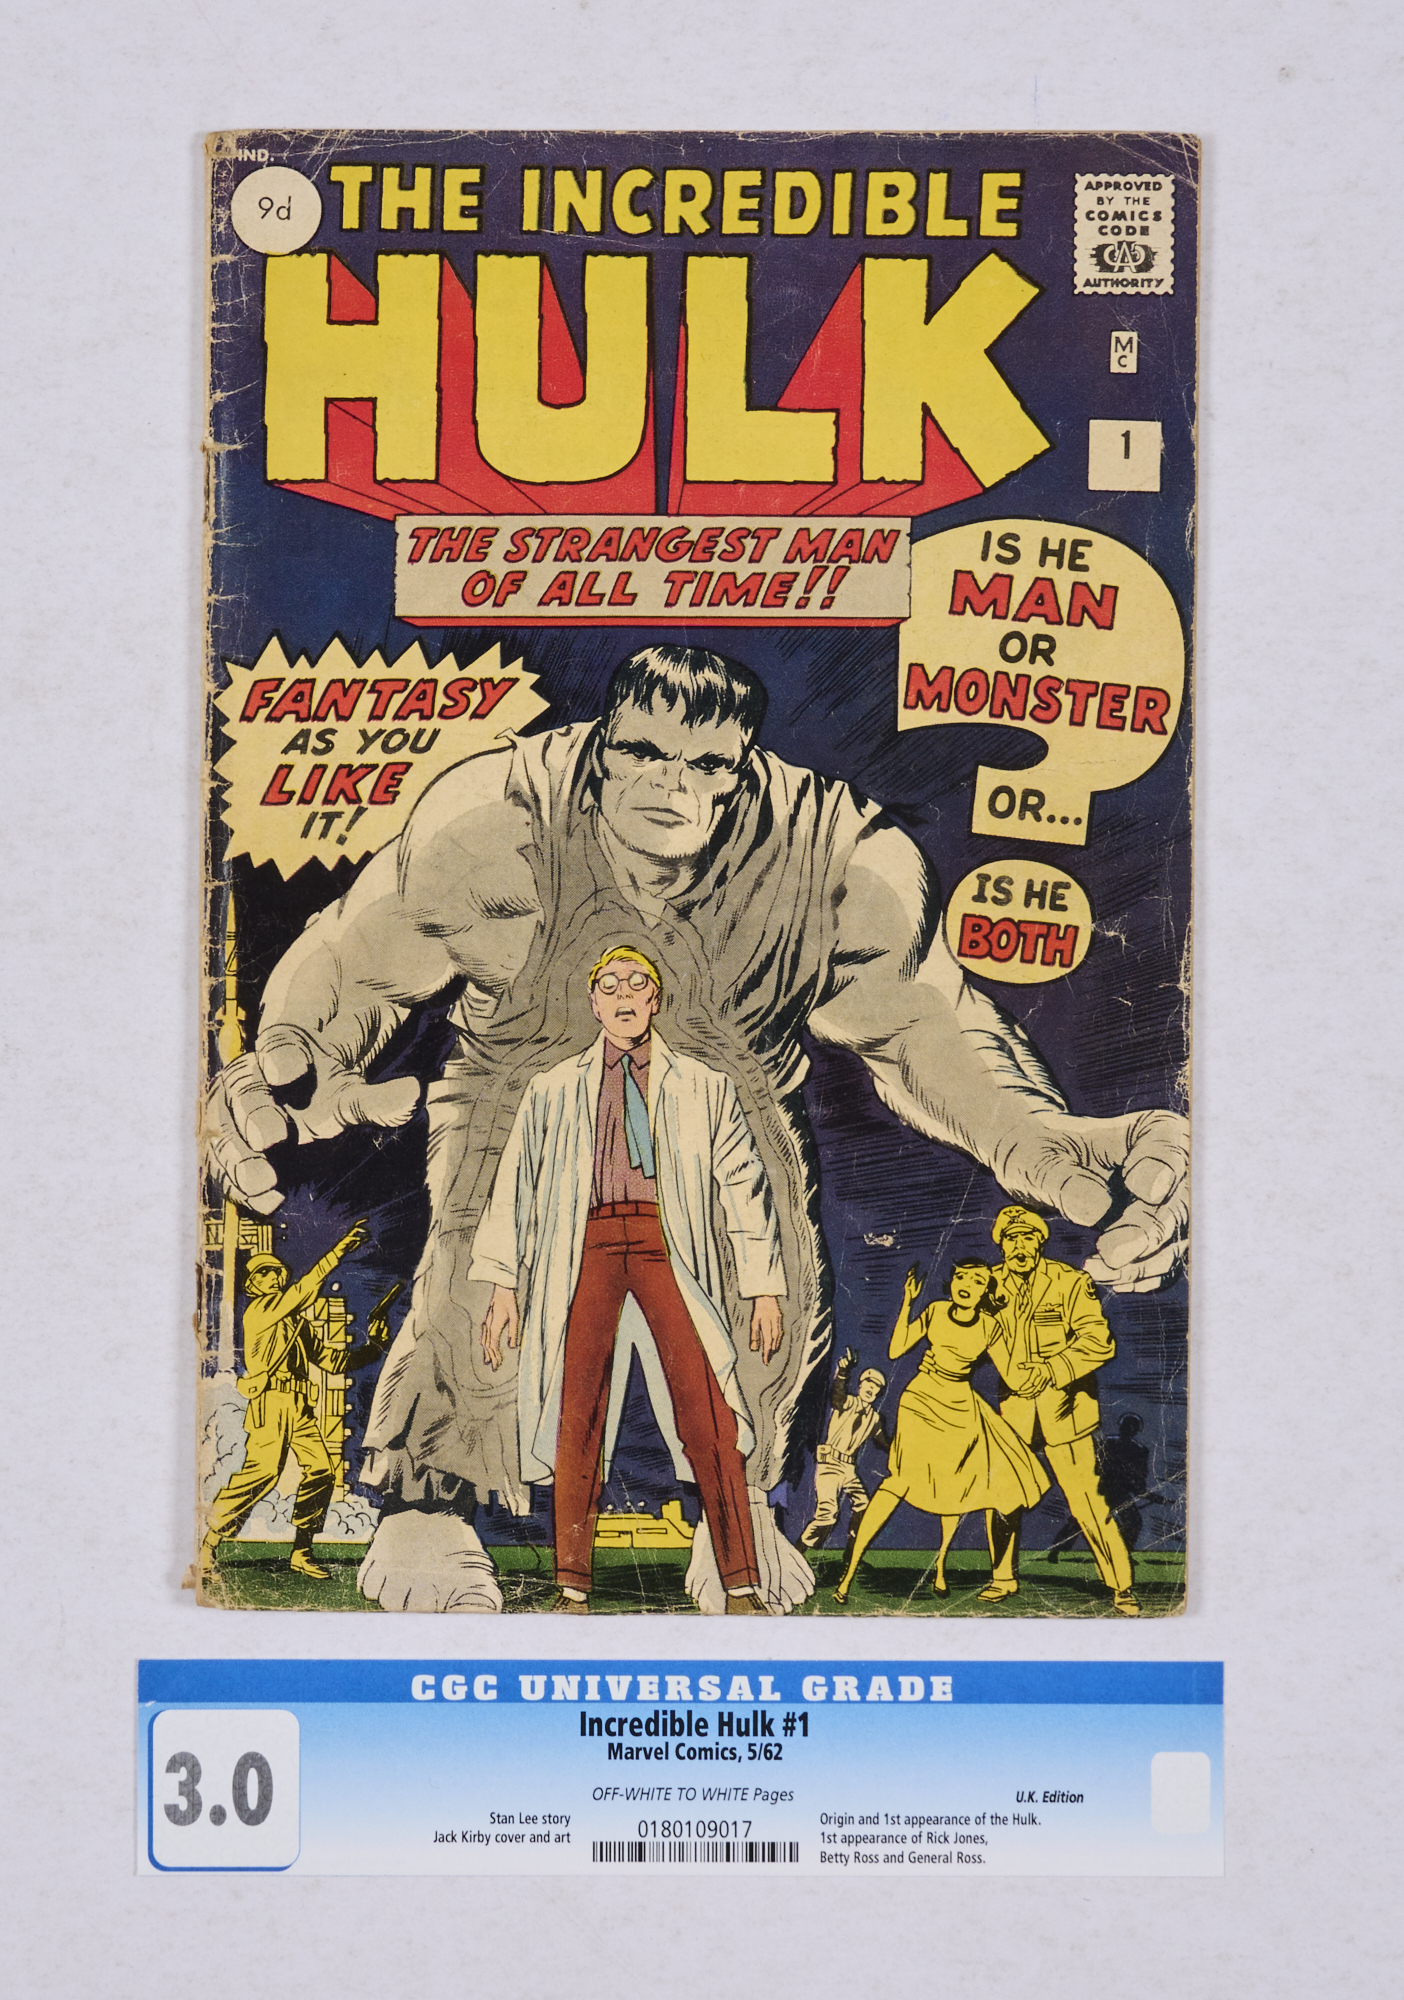 Incredible Hulk 1 (1962) General overall wear and lower staple rust with no major defects. Retrieved